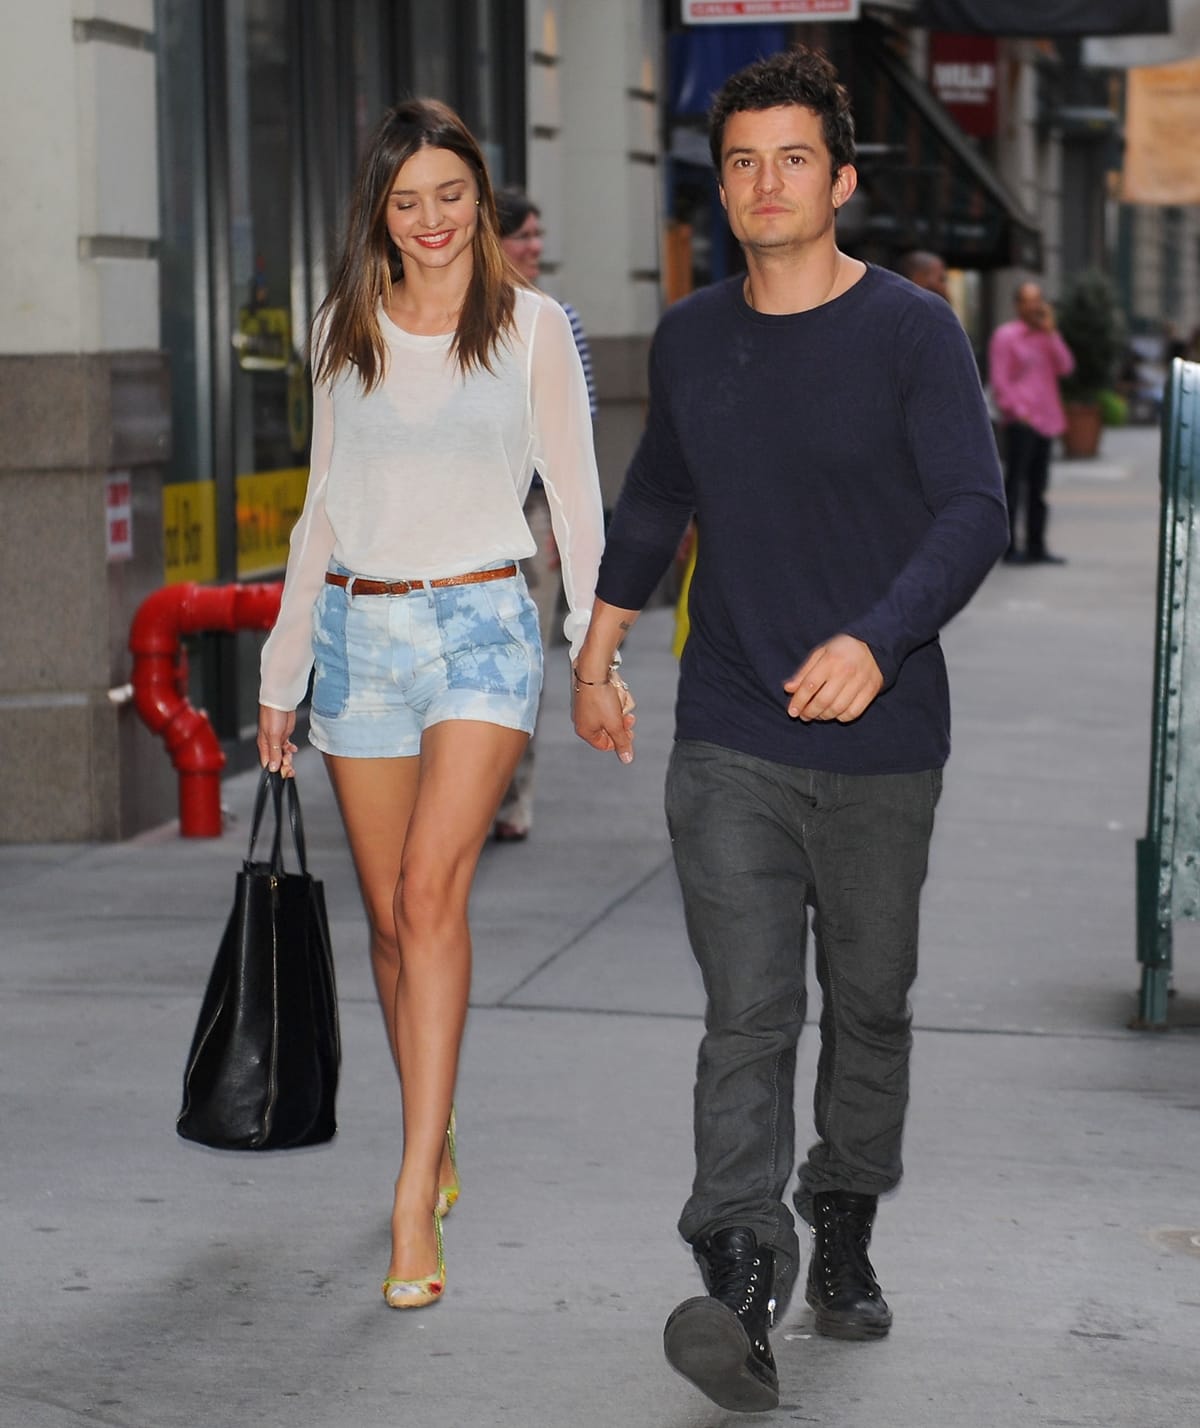 On June 25, 2012, in New York City, Miranda Kerr was seen holding hands with Orlando Bloom, looking chic in Isabel Marant Marcel tie-dye cotton shorts, an Equipment sleeveless signature blouse, Lanvin puffy gladiator sandals, accessorized with Miu Miu Culte sunglasses, a Longines LA Grande Classique ultra-slim alligator strap watch, and a Celine leather zipper detail tote